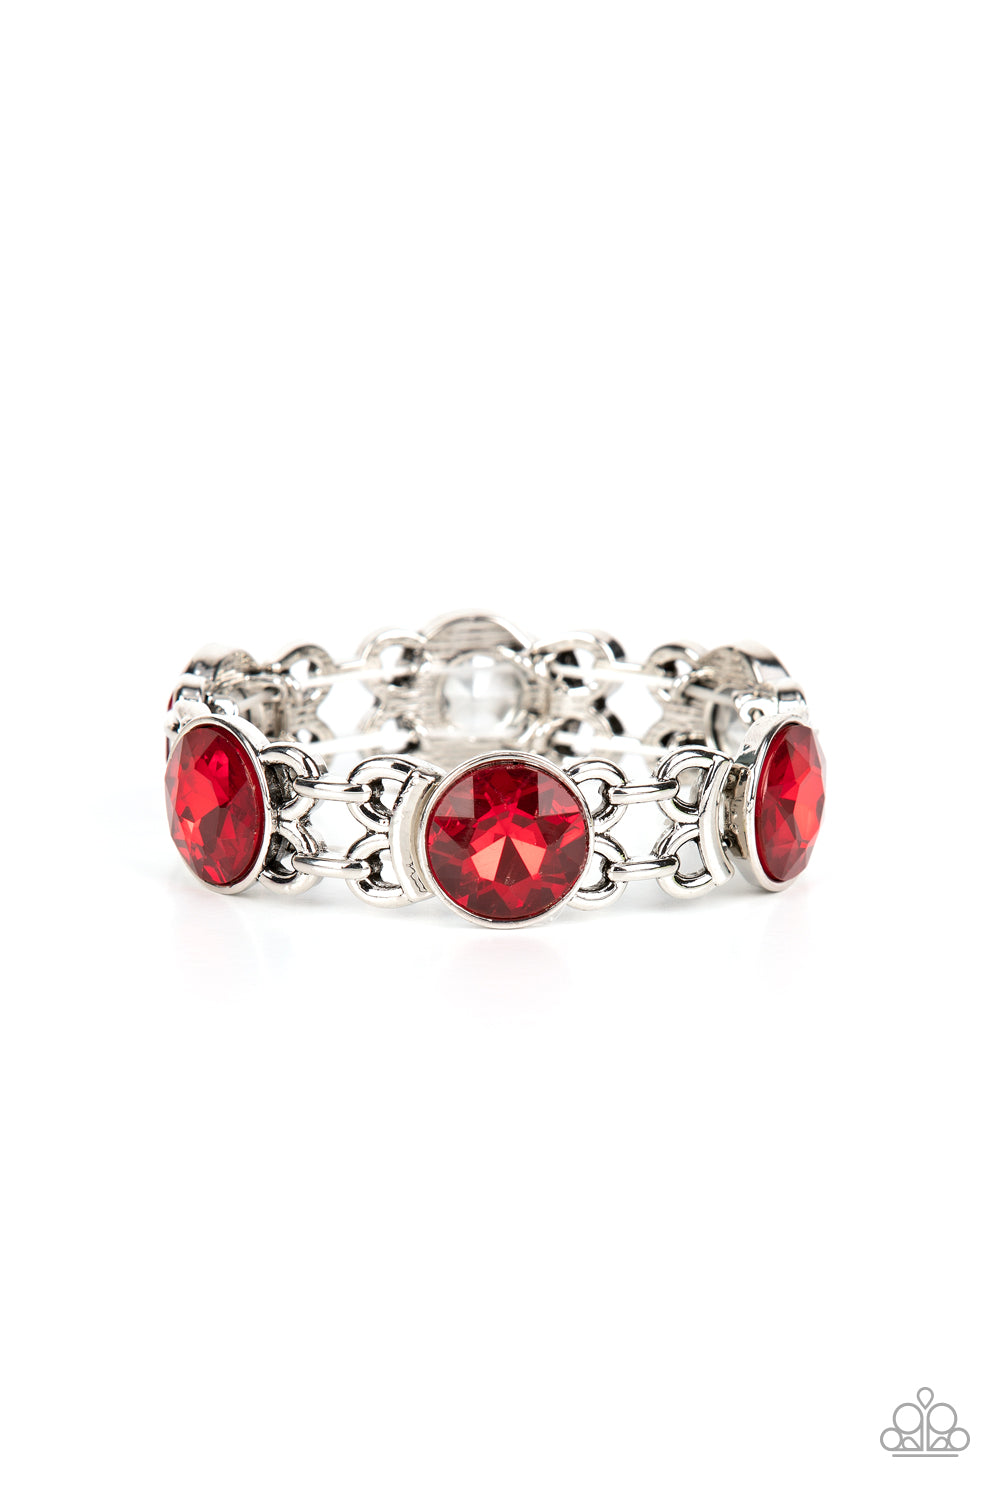 Devoted to Drama - Red***COMING SOON*** - Bling With Crystal